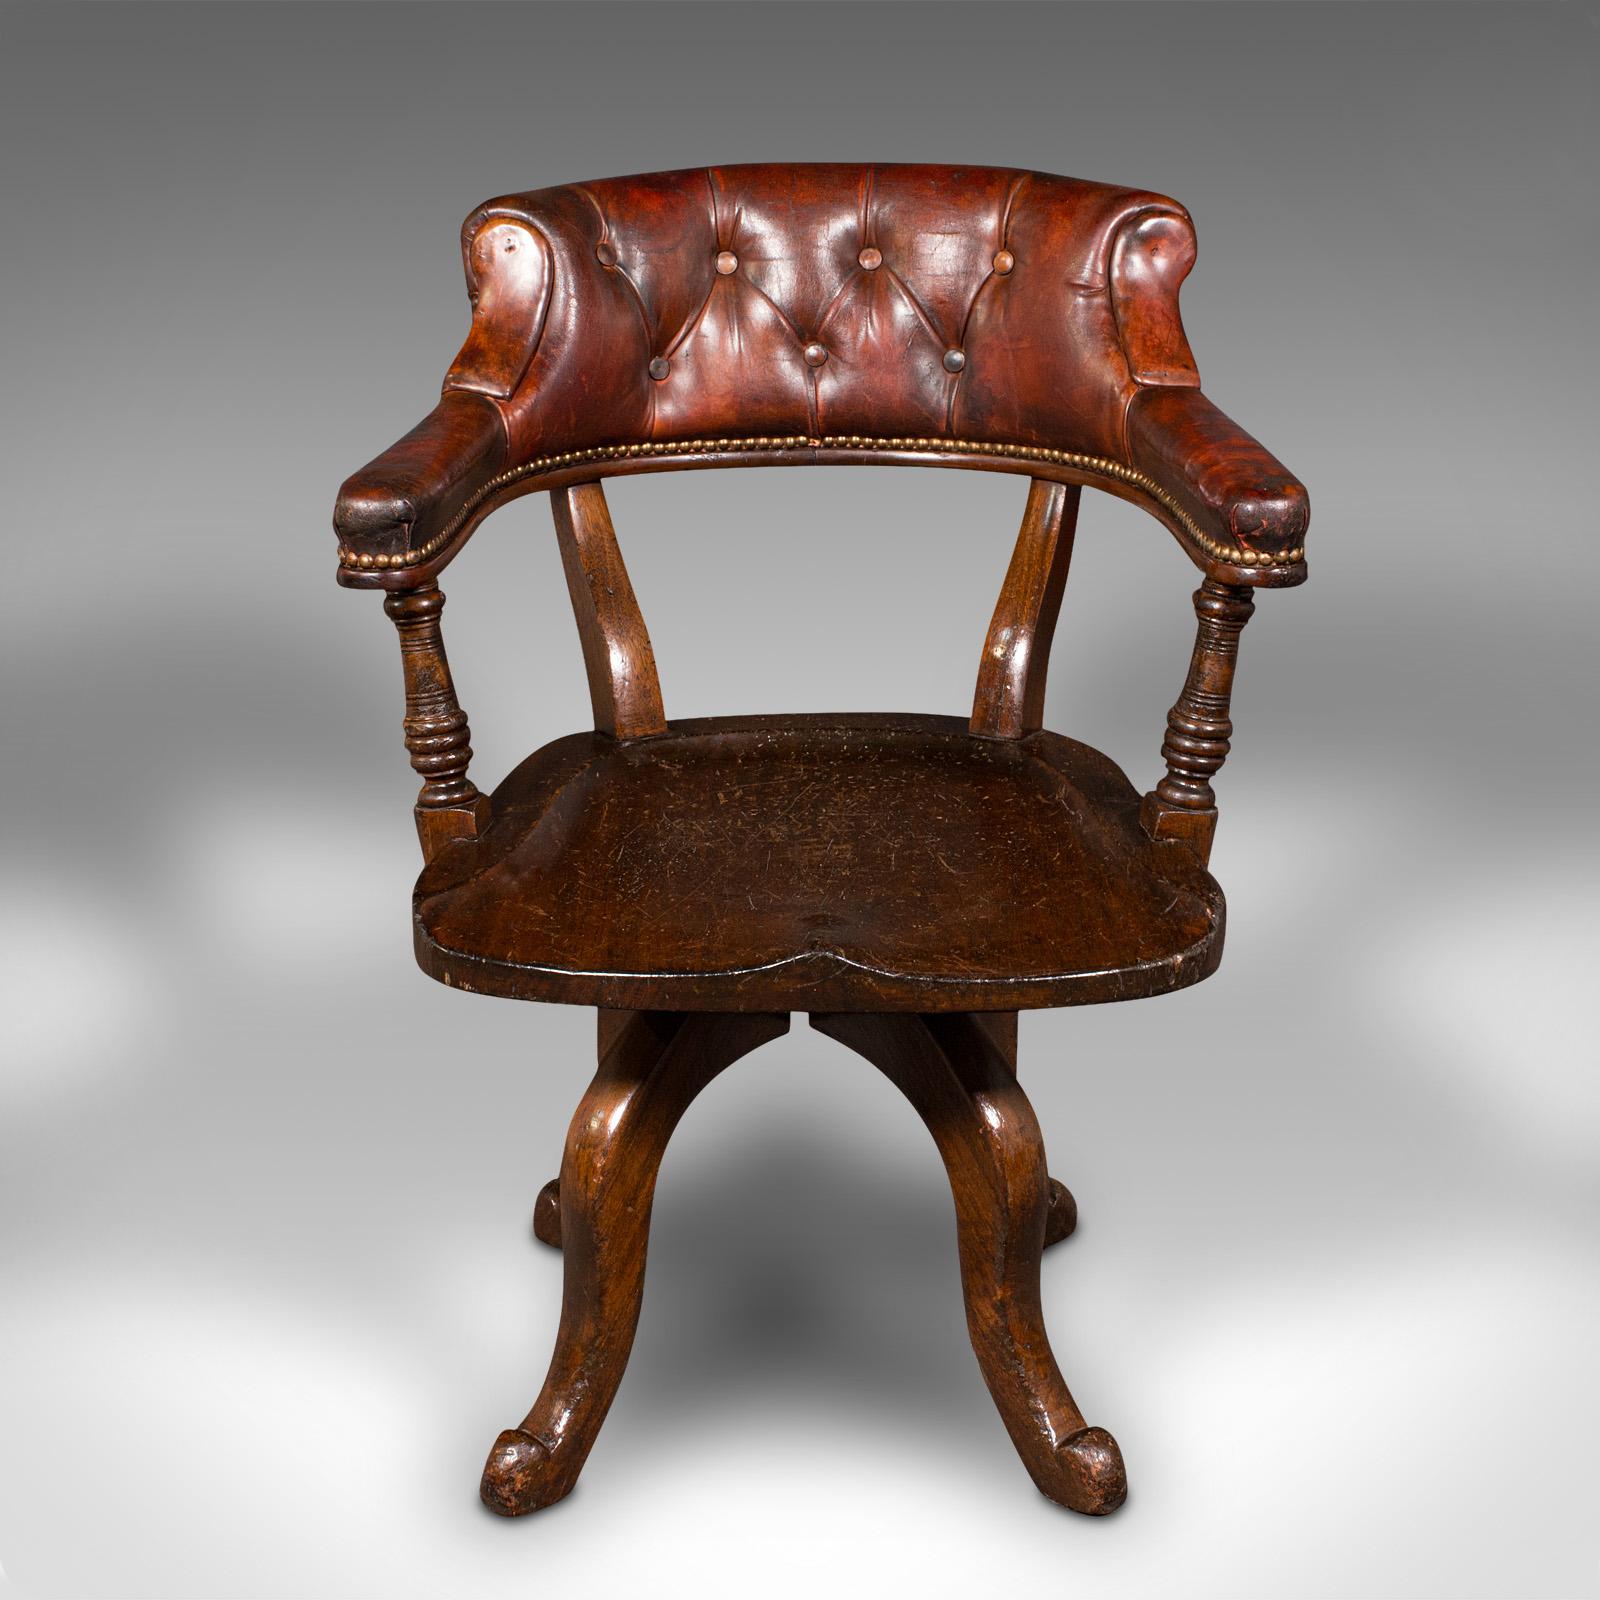 This is an antique porter's hall chair. An English, mahogany and leather rotary desk seat, dating to the Victorian period, circa 1880.

Superb colour and graceful appearance to this versatile chair
Displays a desirable aged patina and in good